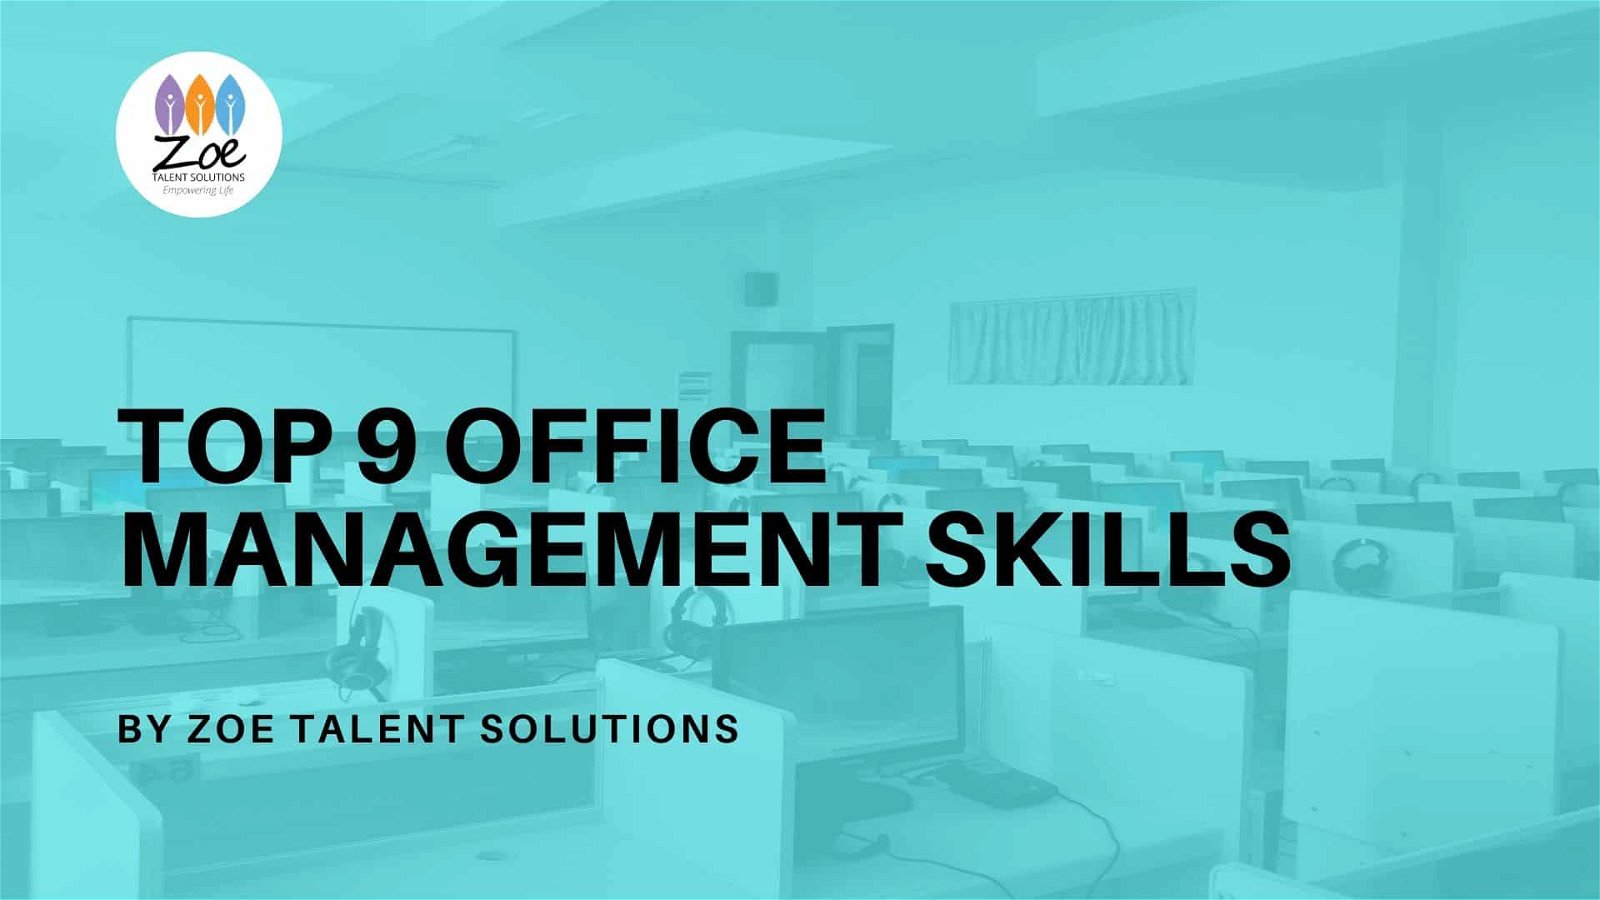 9 Office Management Skills That Will Make You A Great Office Manager